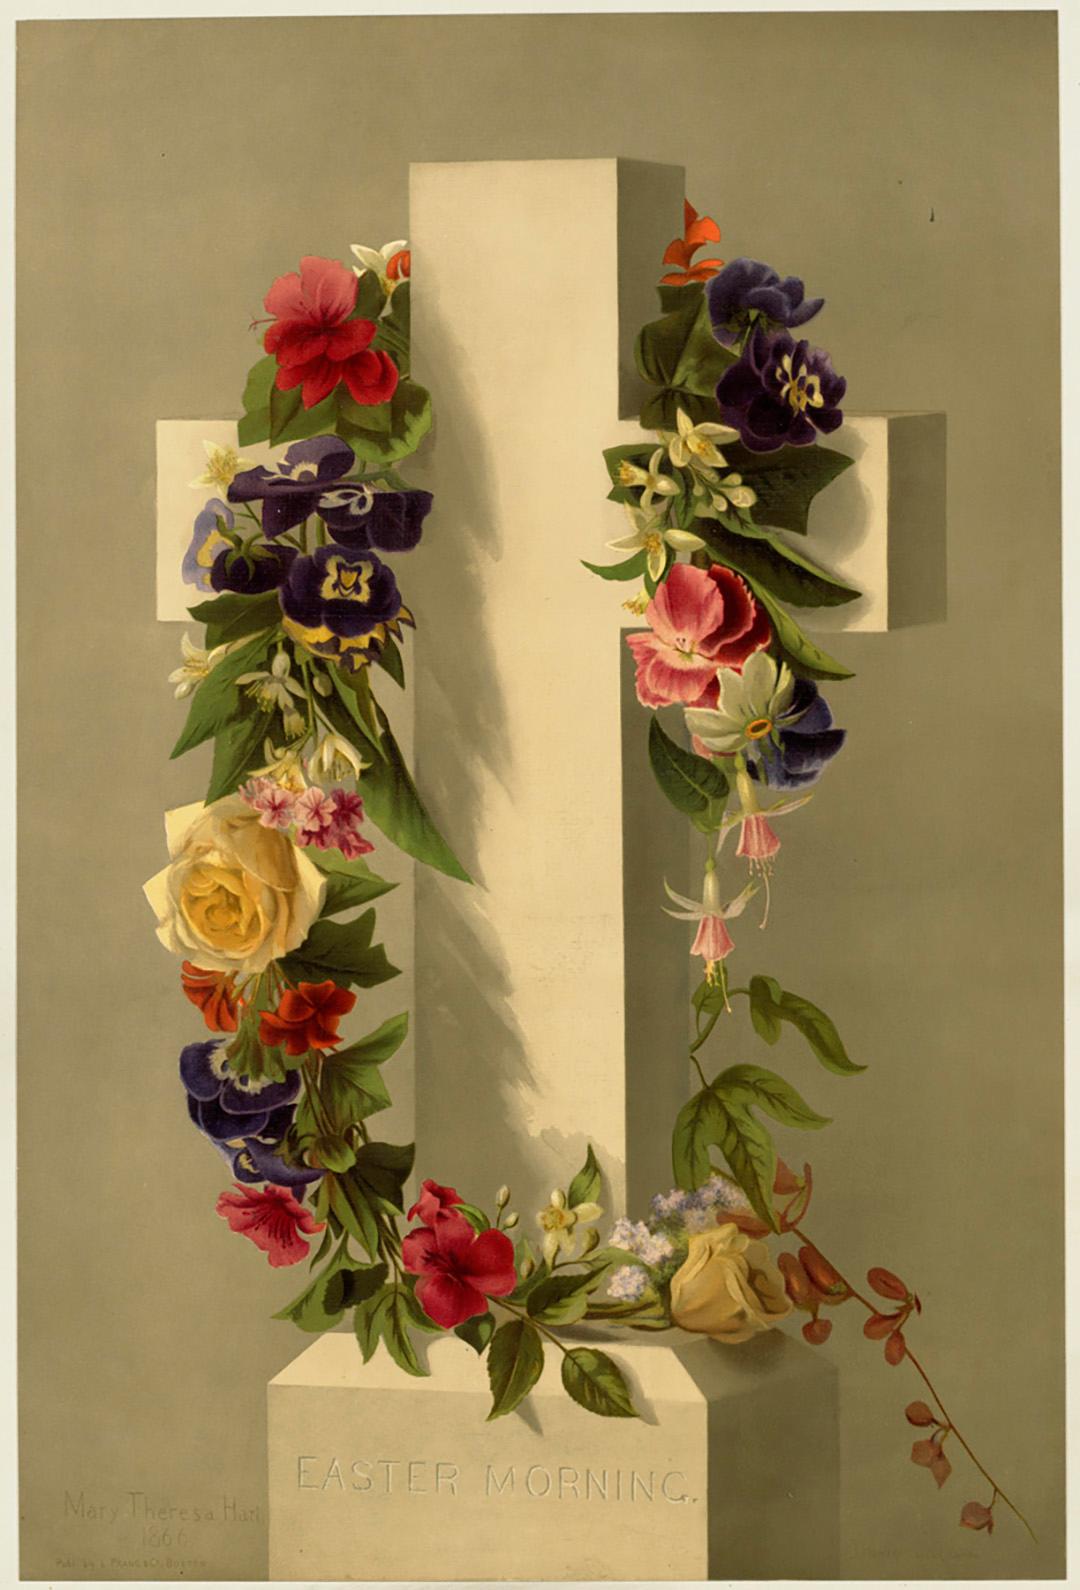 "Easter Morning," late 19th century, by Marie Theresa Hart. Boston Public Library. (Public Domain)